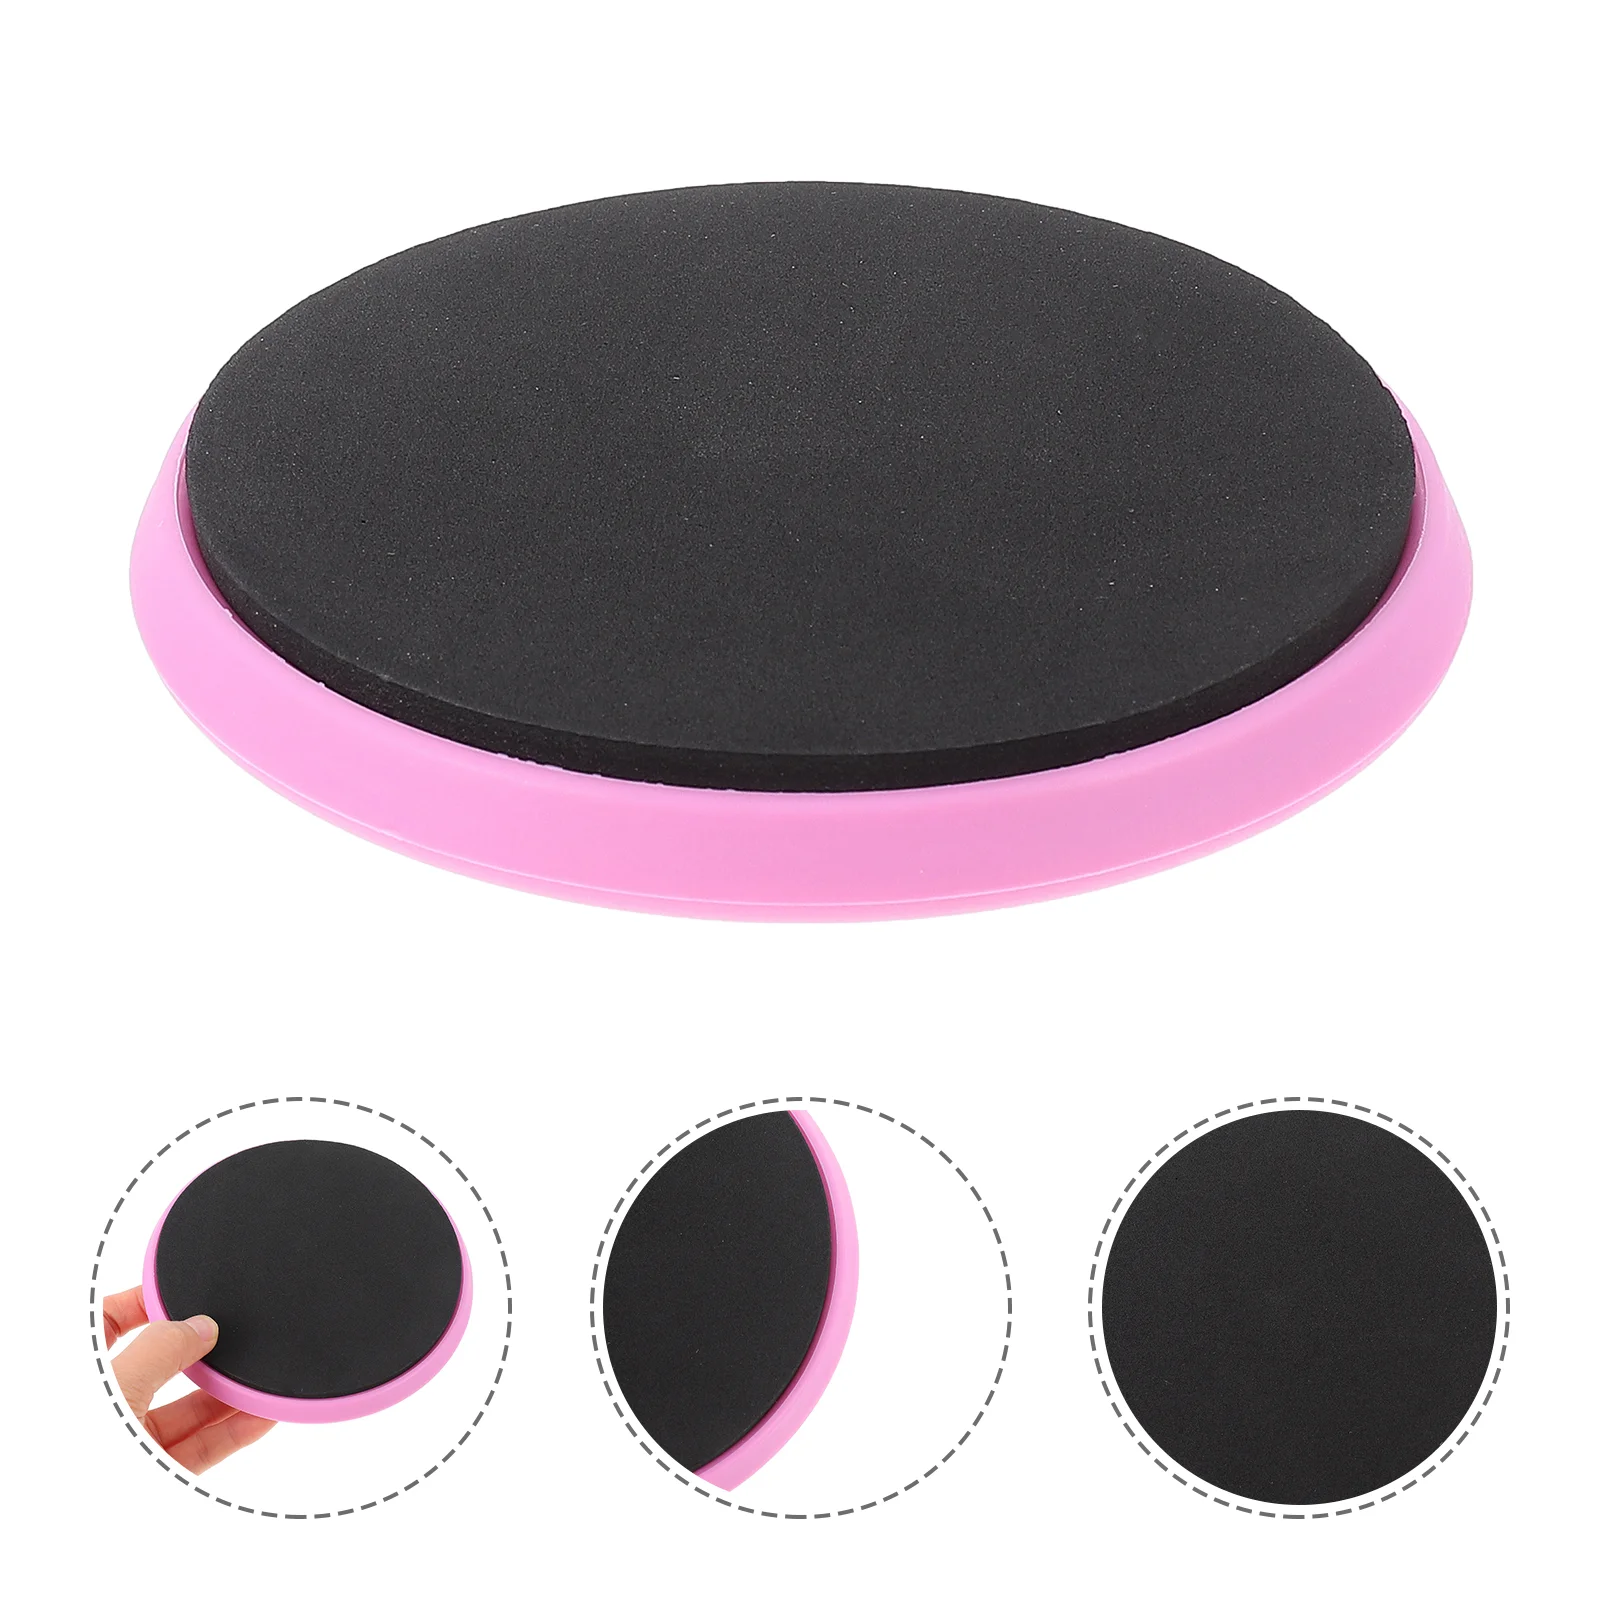 

Ballet Turning Board for Dancers Gymnastics Figure Skaters Turn Disc to Improve Balance Pirouette for Ballet Training Dance